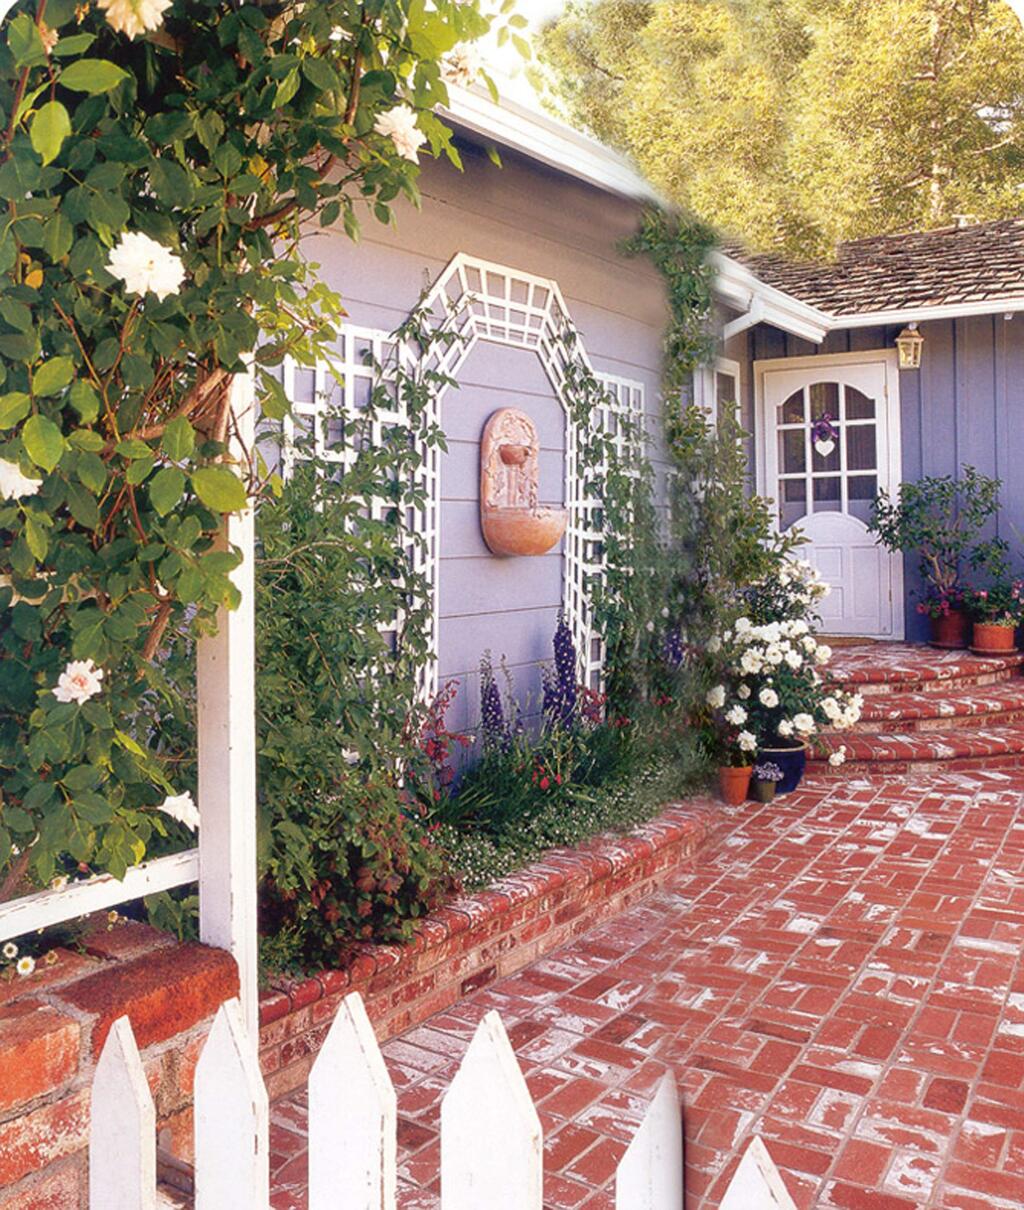 This home's entrance was transformed from a boring, unadorned walk into an interesting garden by adding wall decorations to the side of the house .Borrowed from the French, this trellising technique called “tromp l'oeli” (meaning 'fool the eye') gives the false impression of a larger, three dimensional space. The fountain in the middle as a focal point adds a sweet sound of trickling water and the whole space is soothing and welcoming. (Louise Leff)